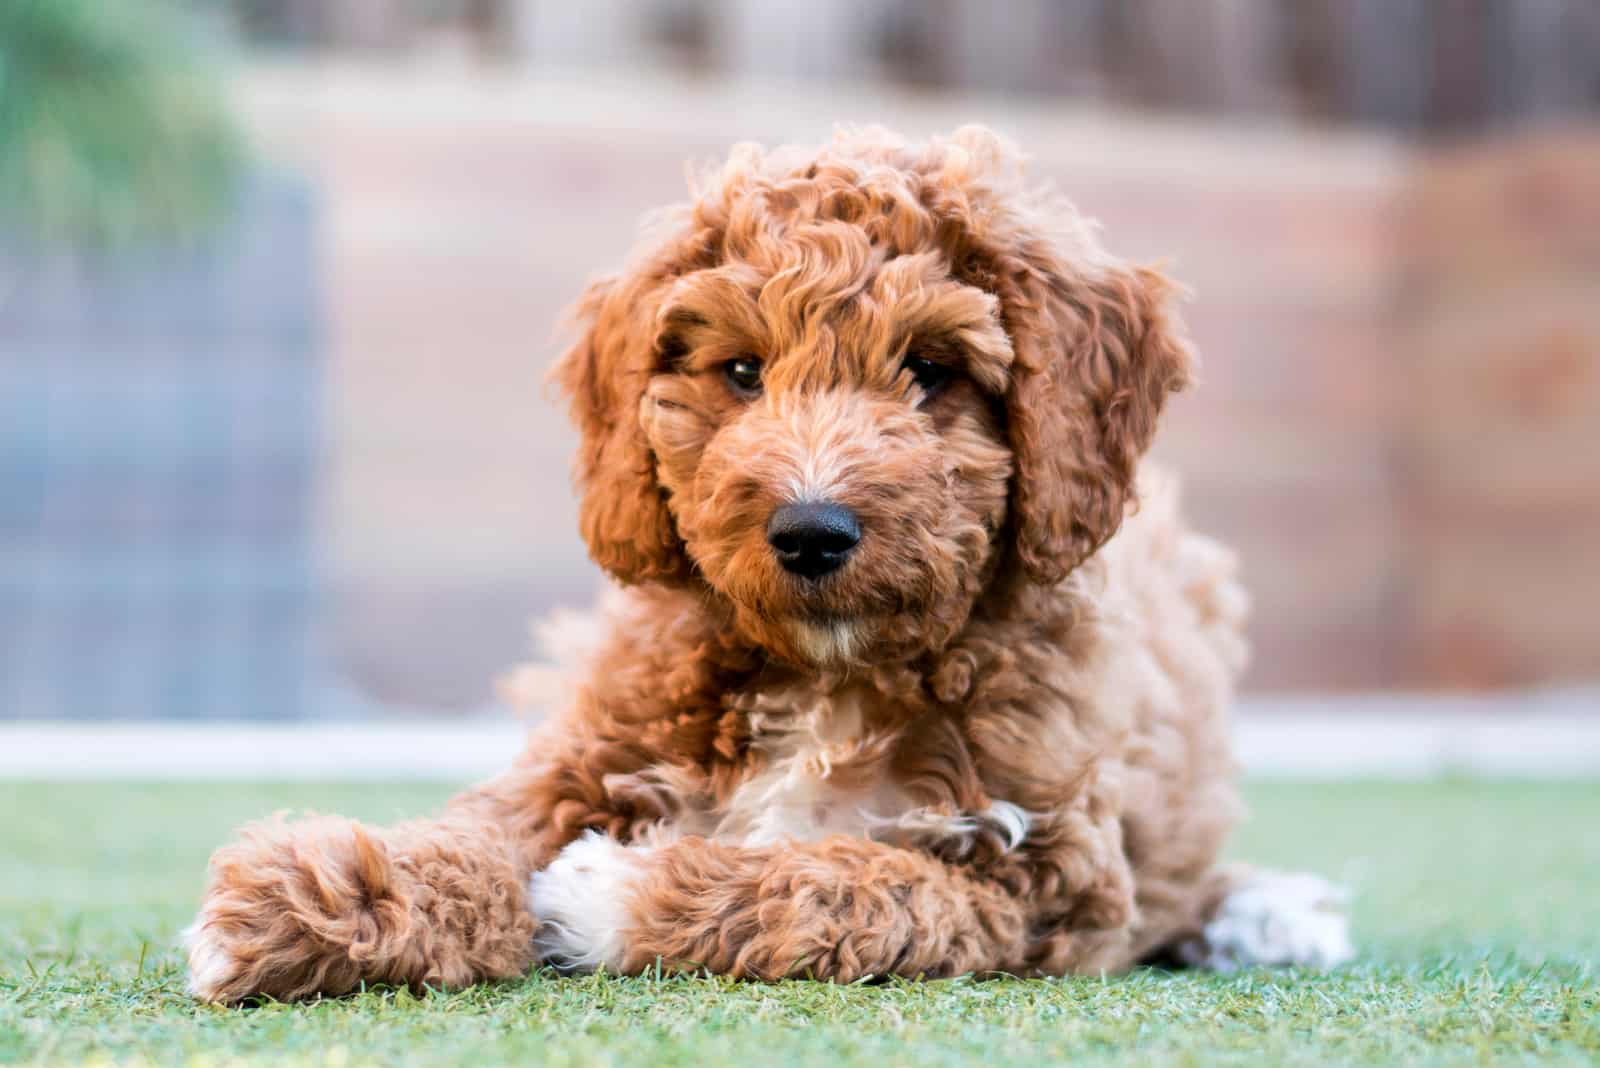 Irish Doodle puppy laying on the grass outdoor